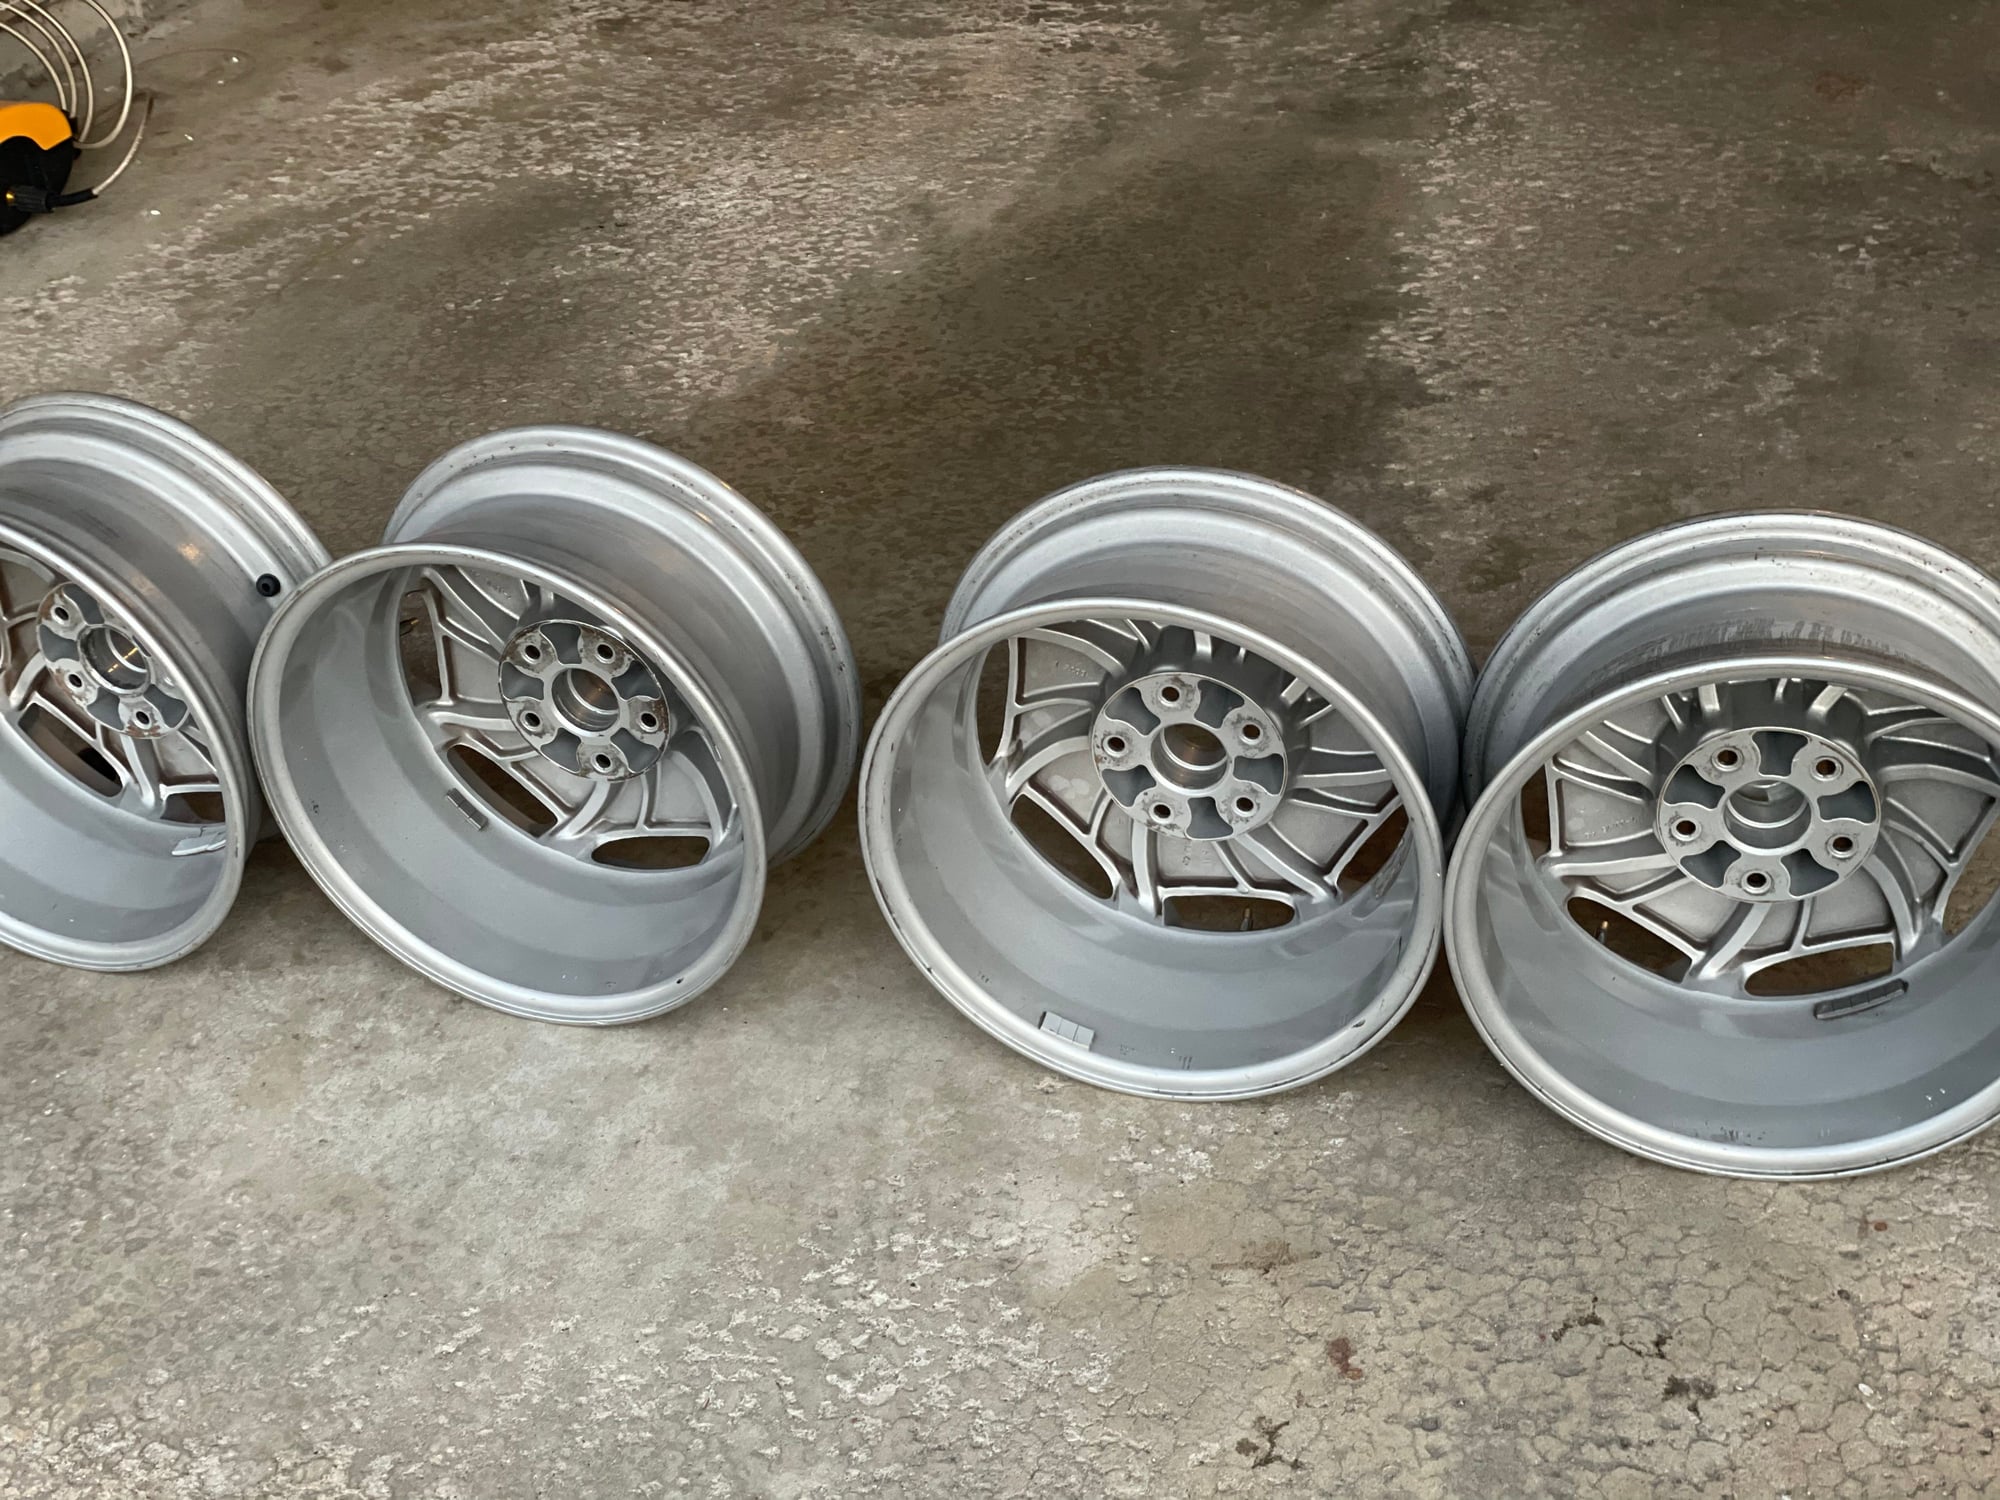 Wheels and Tires/Axles - Turbo 2 wheels s4 - Used - 1986 to 1991 Mazda RX-7 - St Louis, MO 63114, United States